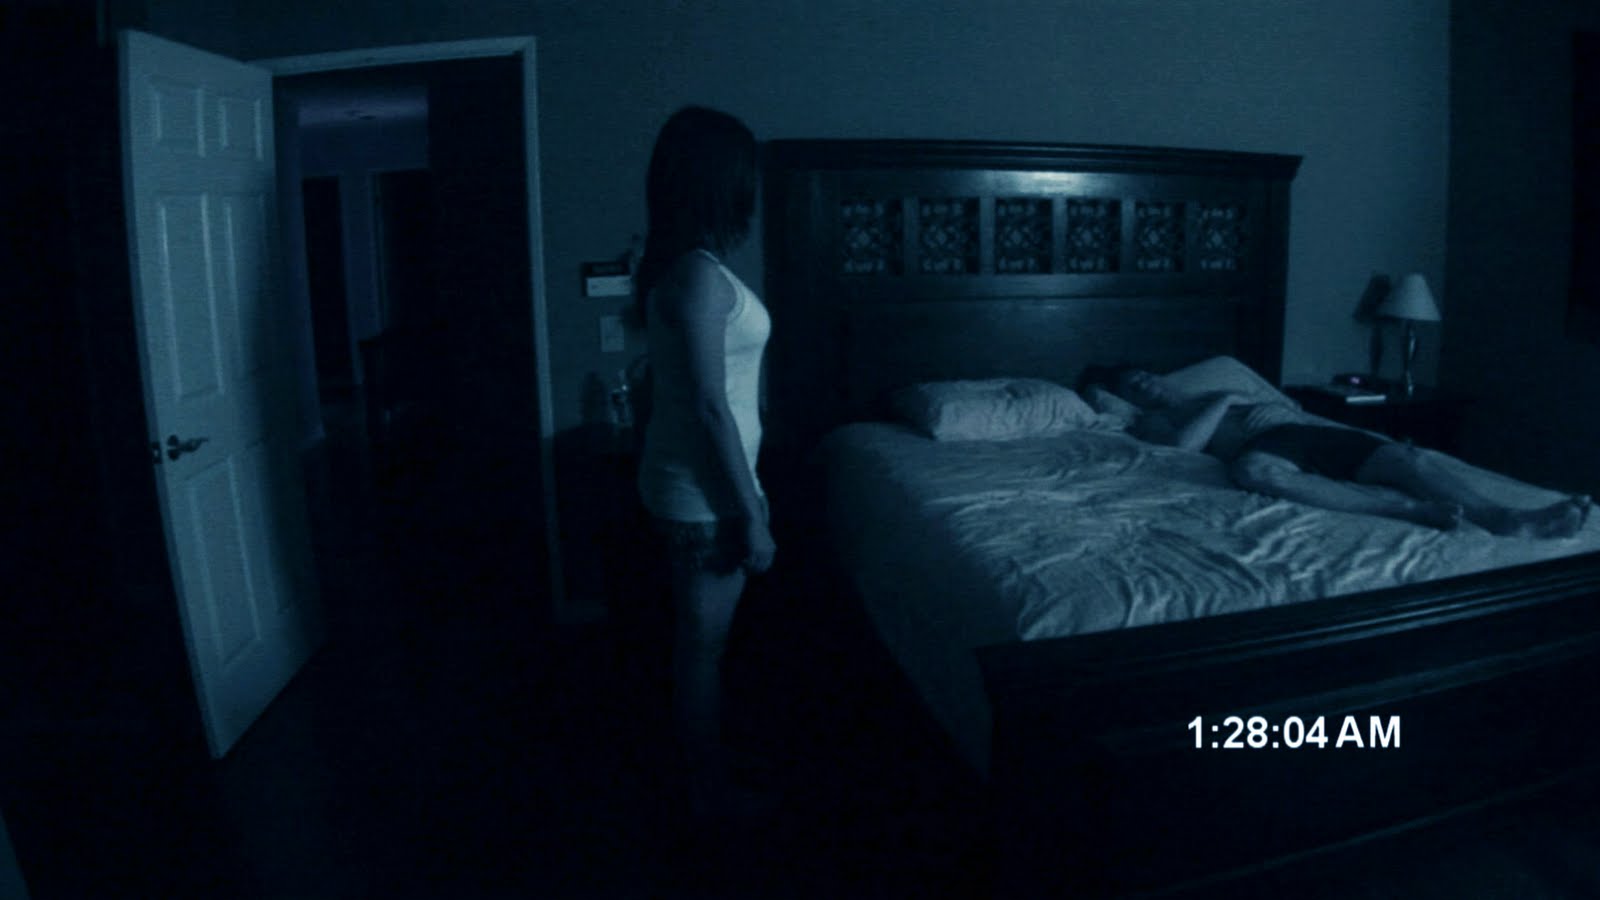 Paranormal Activity, 2007.Run Micah! Dump her while you still can!